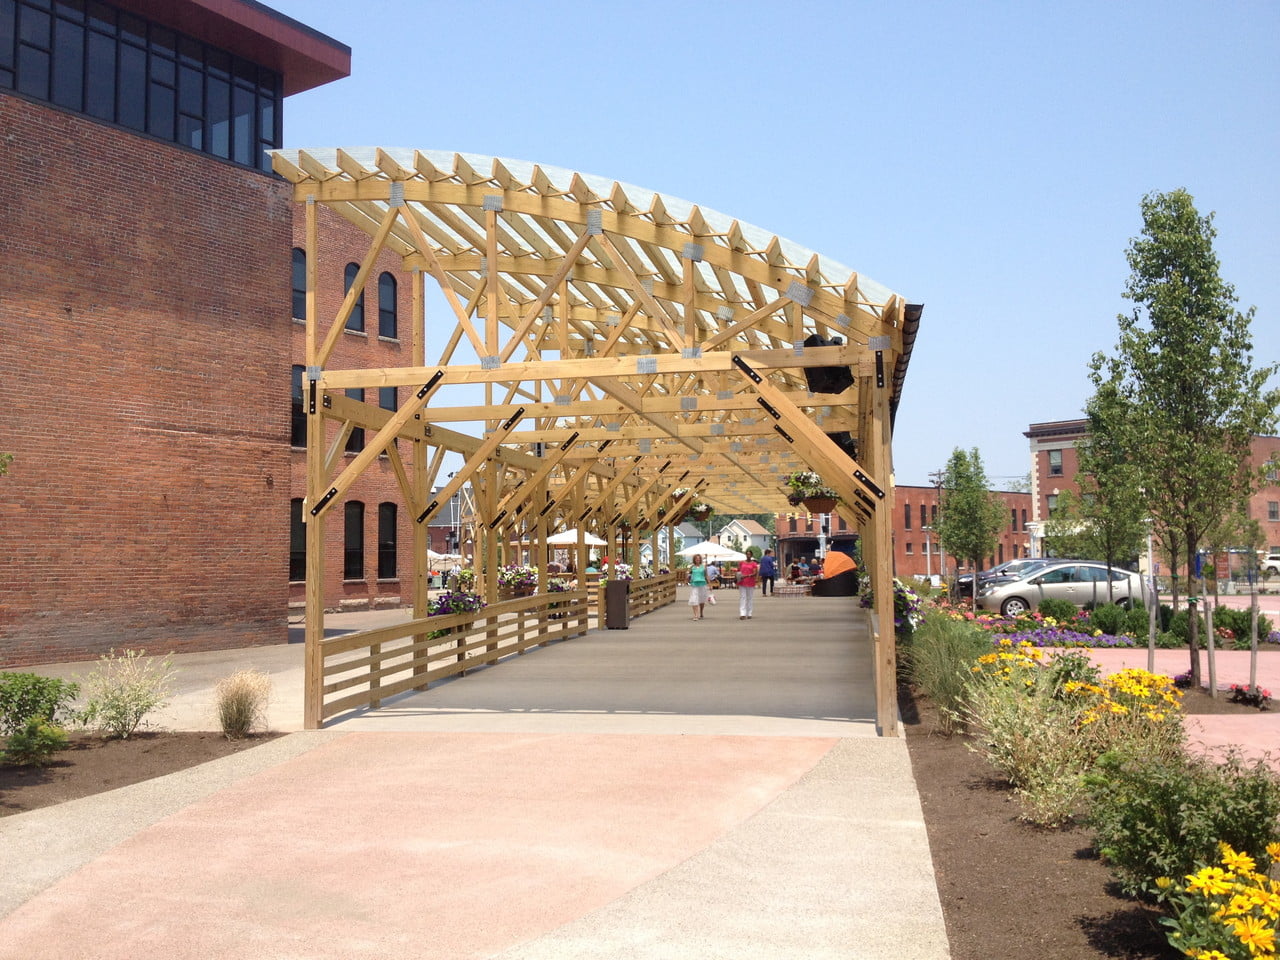 Covered walkway canopy